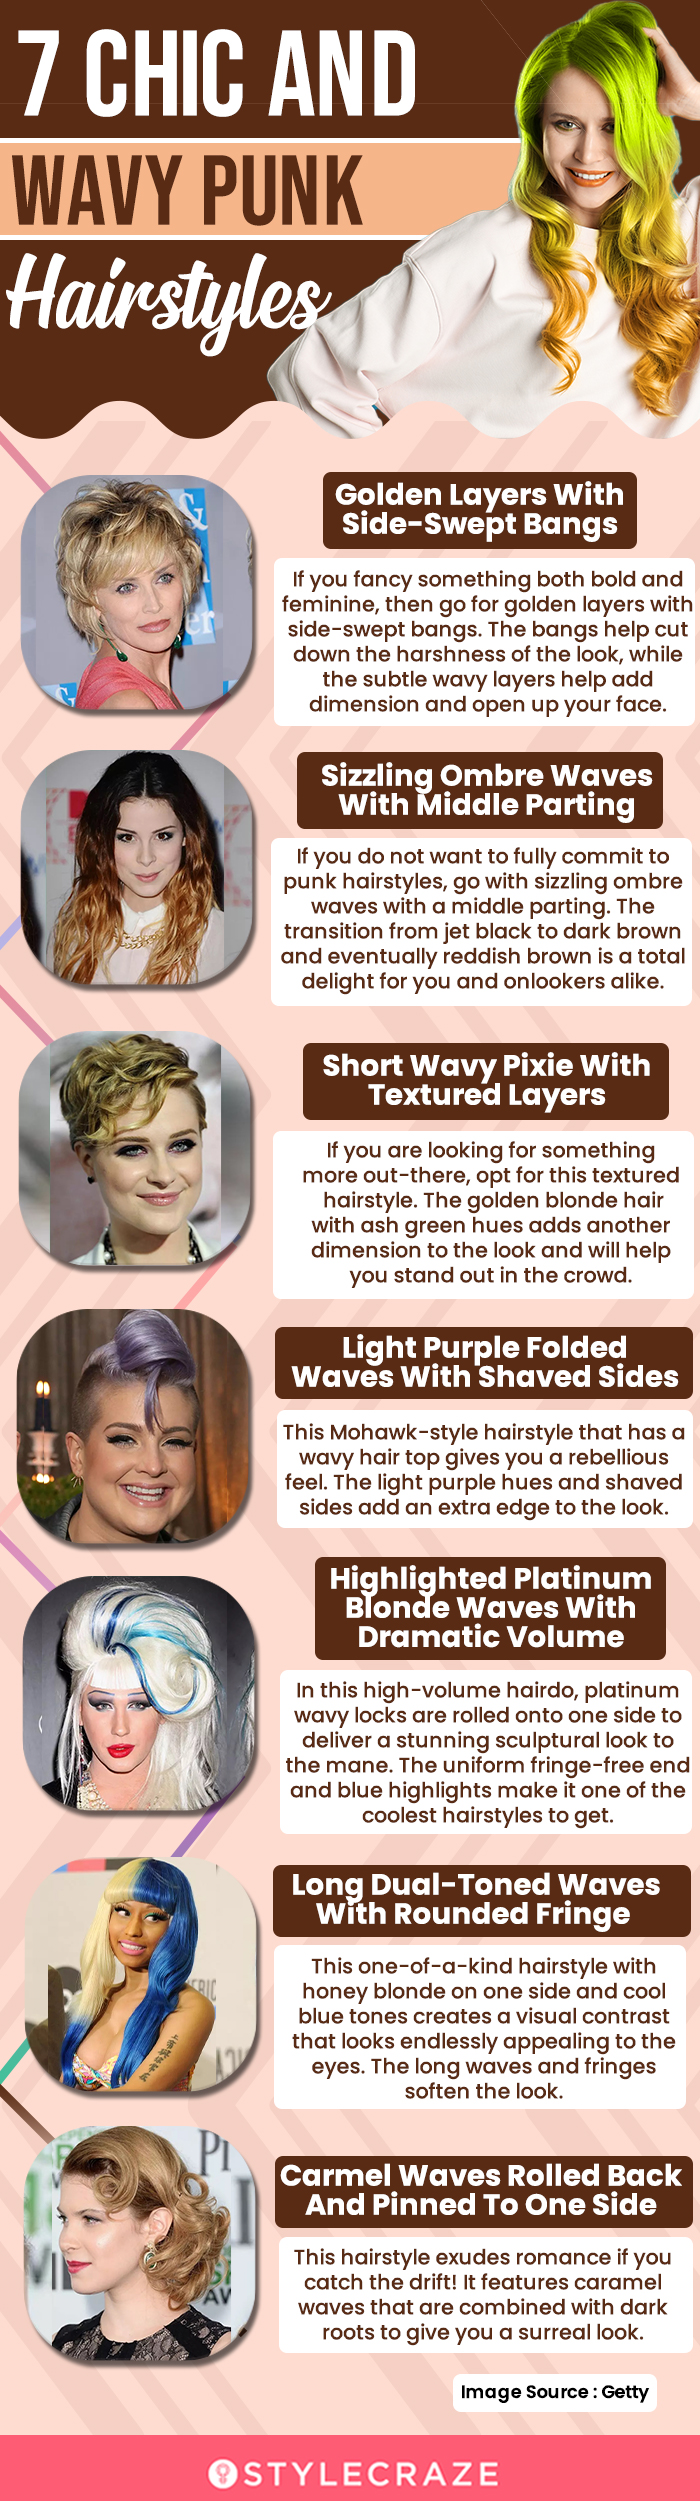 7 chic and wavy punk hairstyles (infographic)